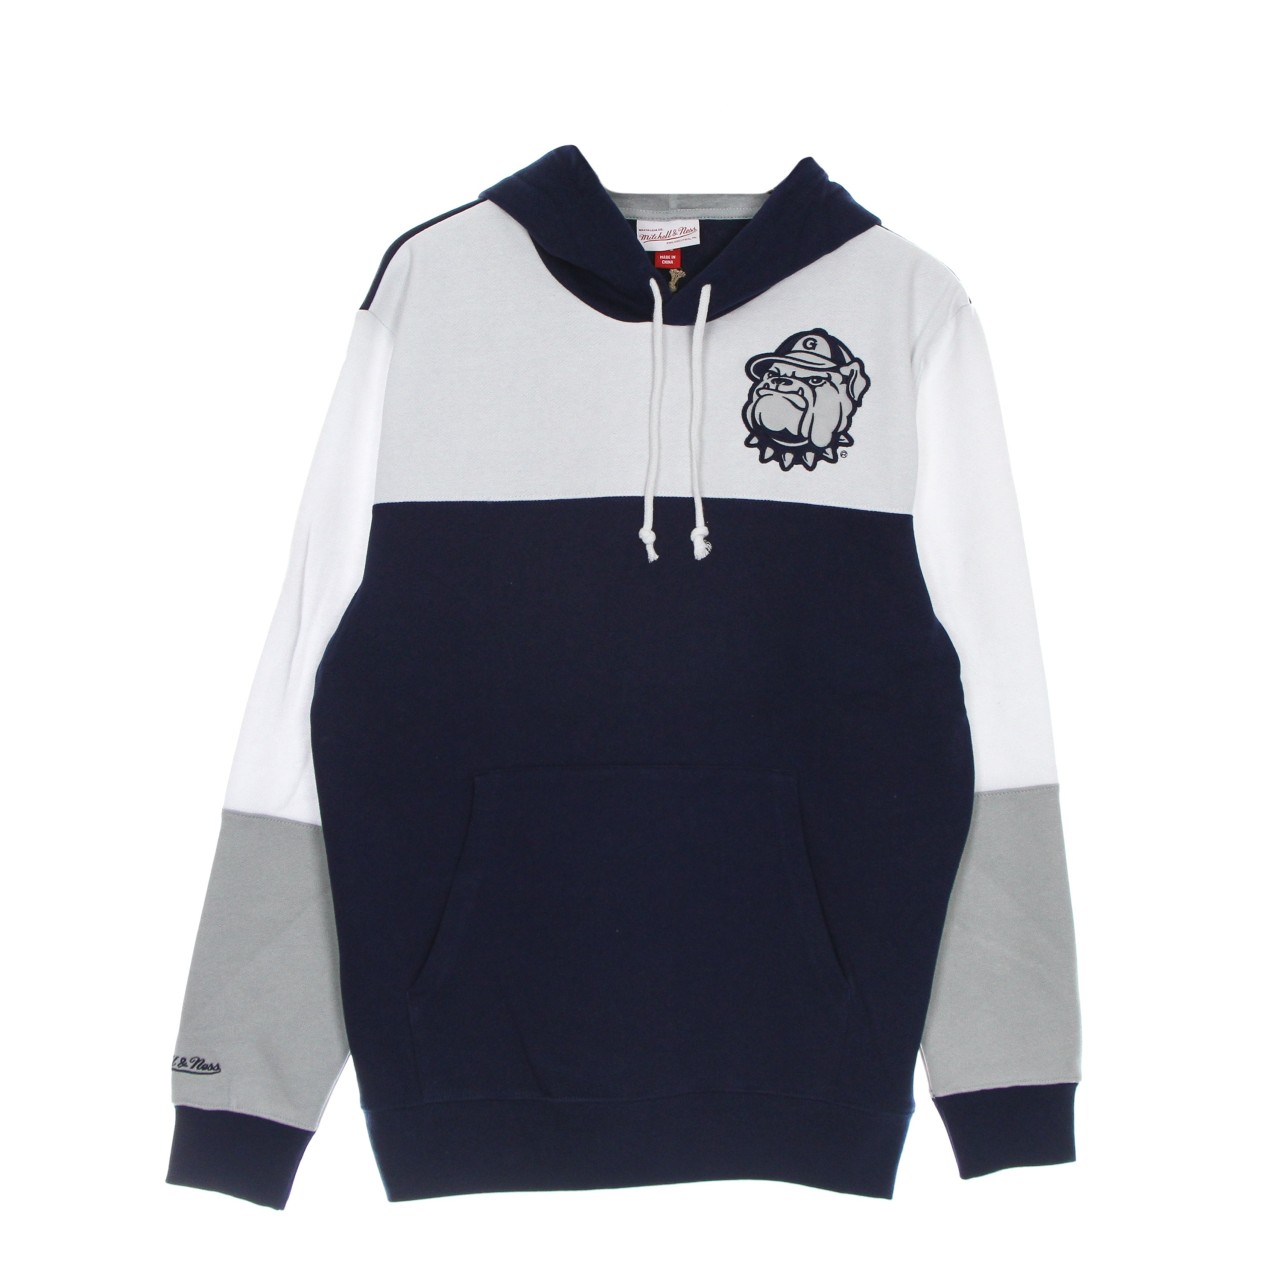 MITCHELL & NESS NCAA FUSION FLEECE 2.0 GEOHOY FPHD1217-GTWYYPPPNYWH